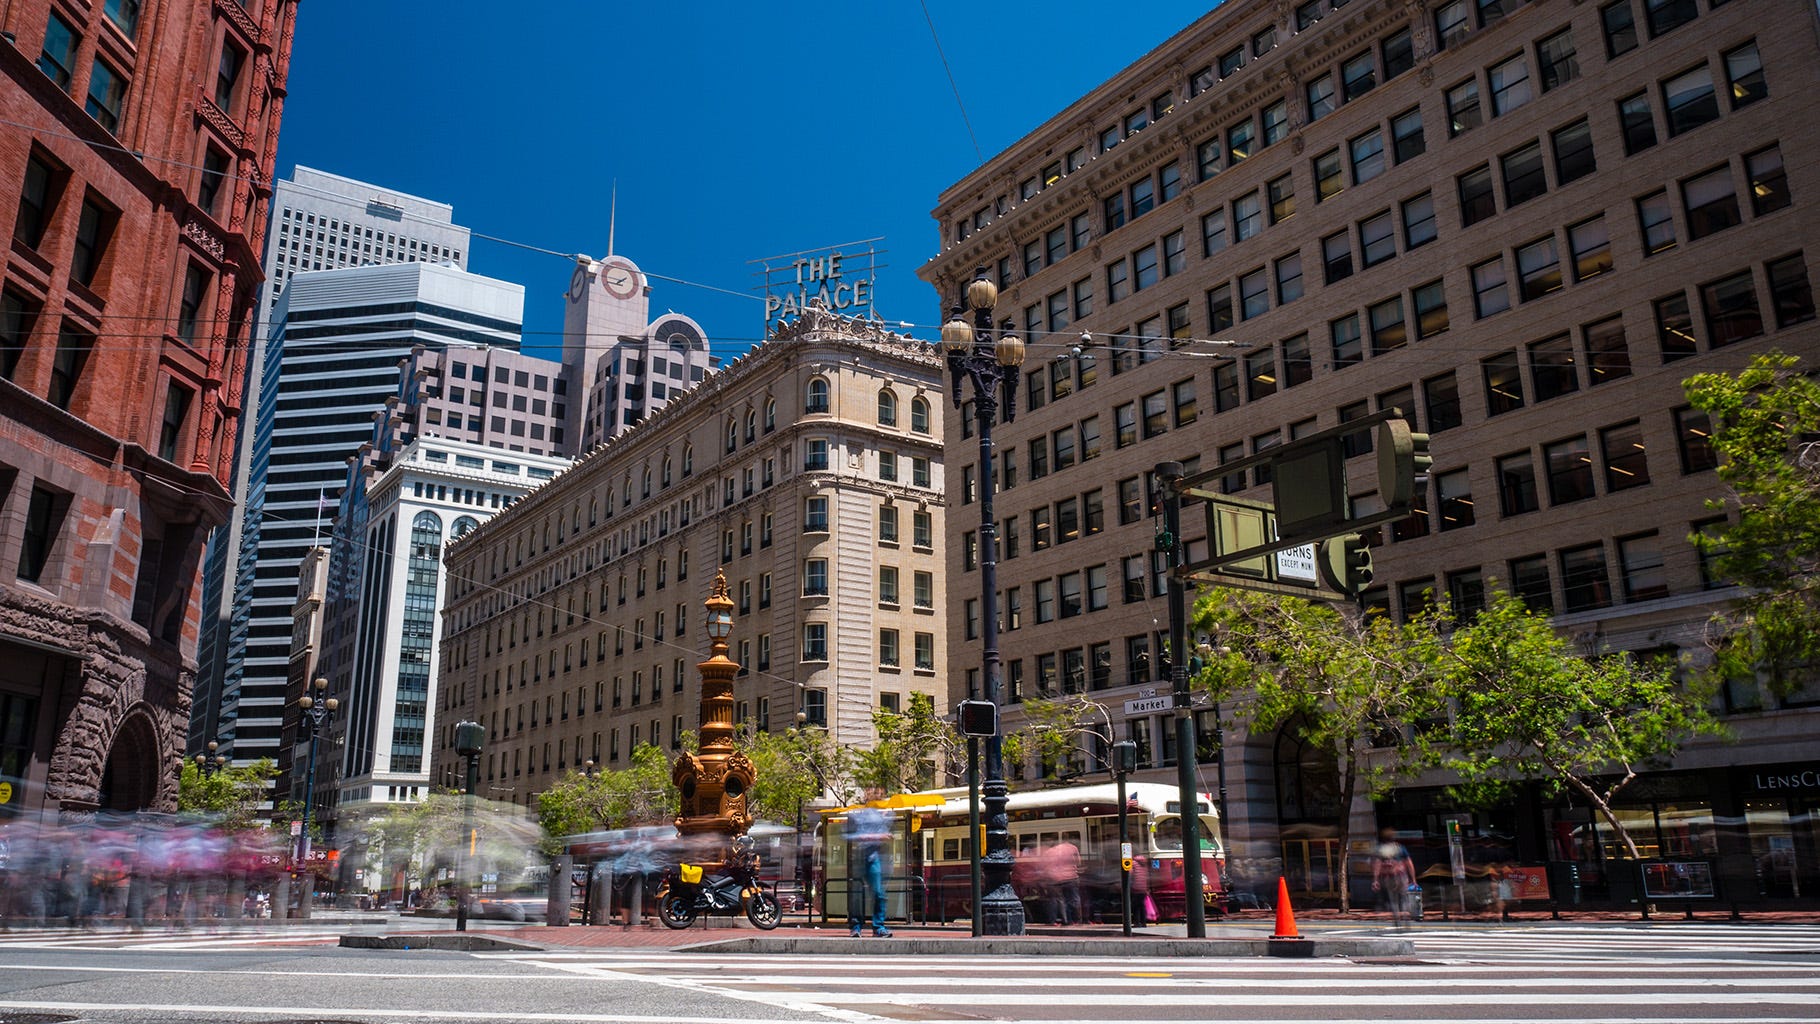 Wide-angle photo of Lotta's Fountain in San Francisco, with tall buildings surrounding a small triangular island where the bronze-colored fountain stands. In front of the fountain, a Zero electric motorcycle is parked. And on sidewalks around the street, the blurred images of pedestrians are visible (this is a long exposure photo that renders movement as blurs)